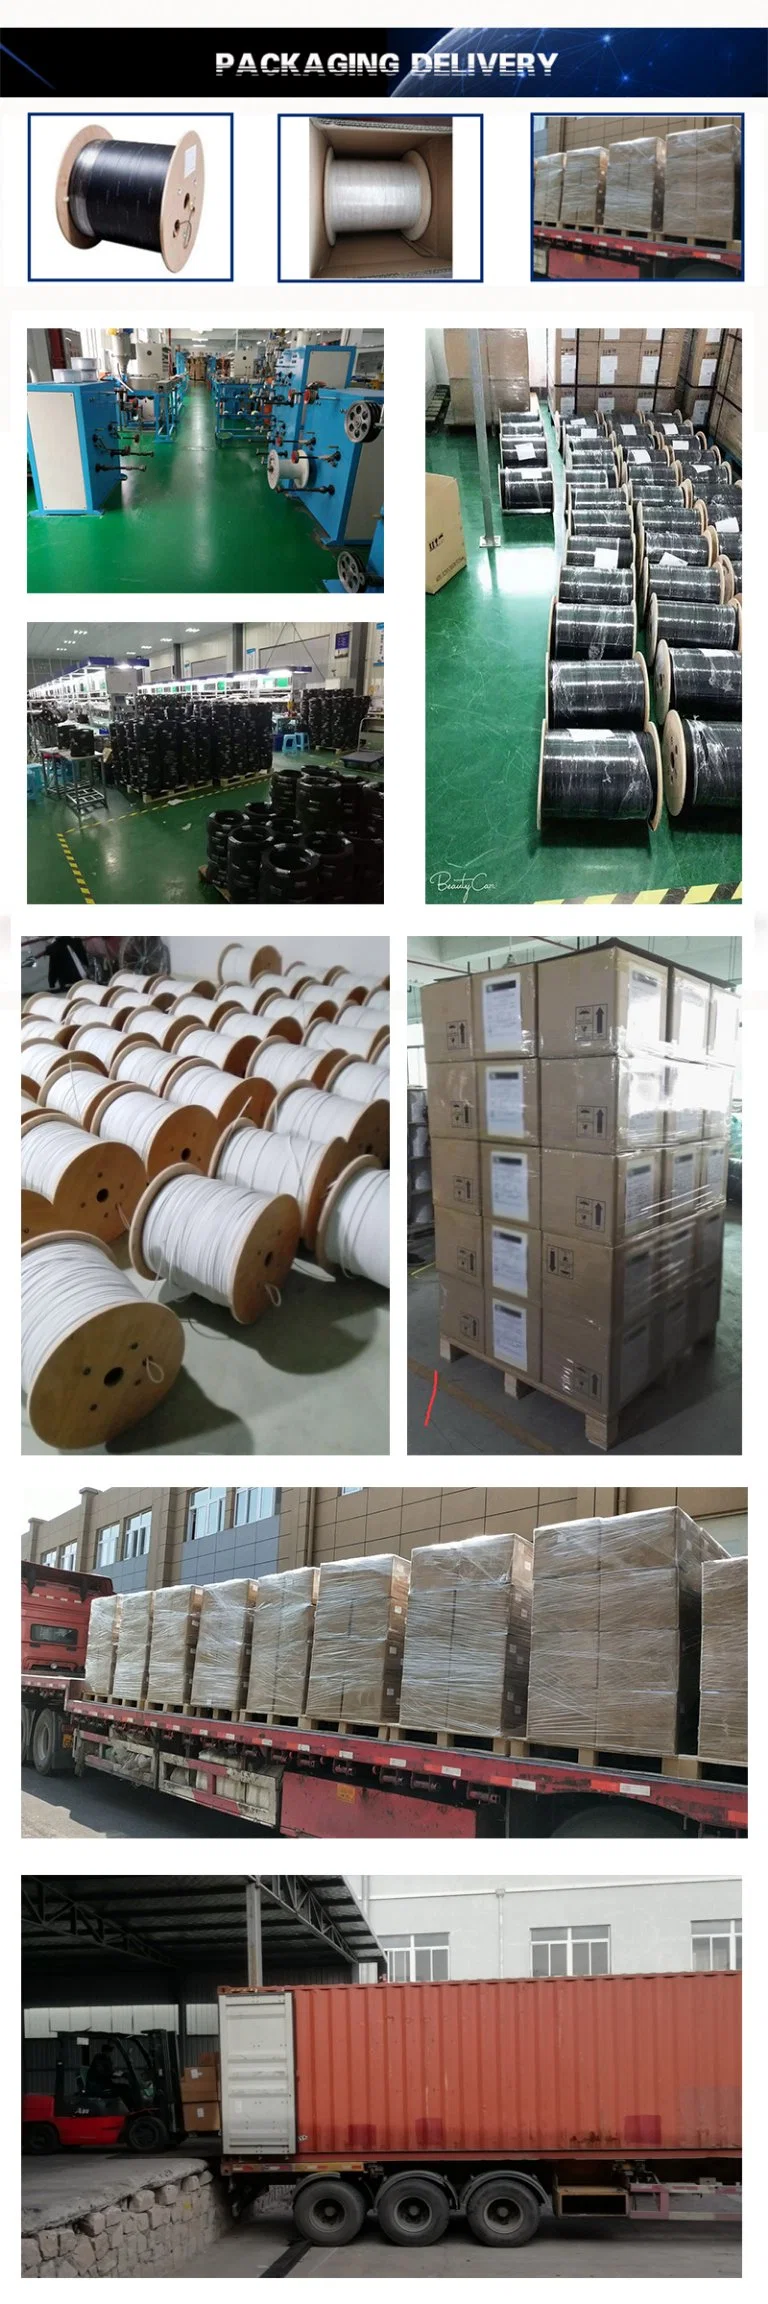 Drop Cable Fiber Optical Optic Cable Price FTTX Drop Cable LSZH Jacket Fiber Optic Drop Cable